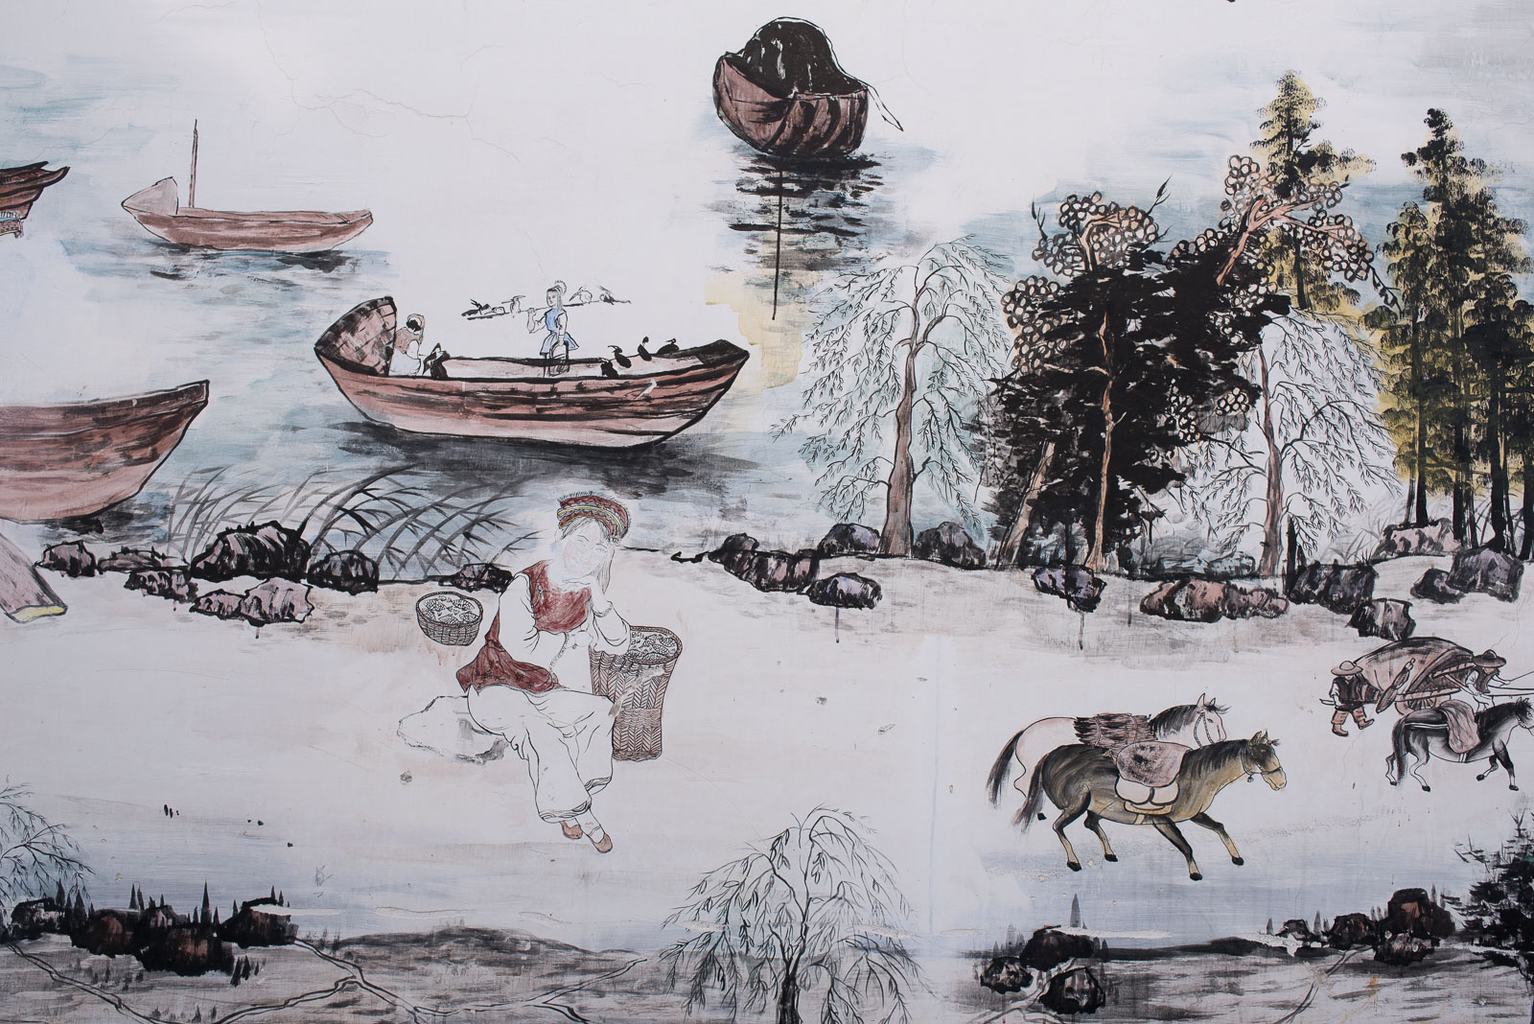 Picture: Fishing, farming, trade: view of the Dali area in a mural in Caicun.